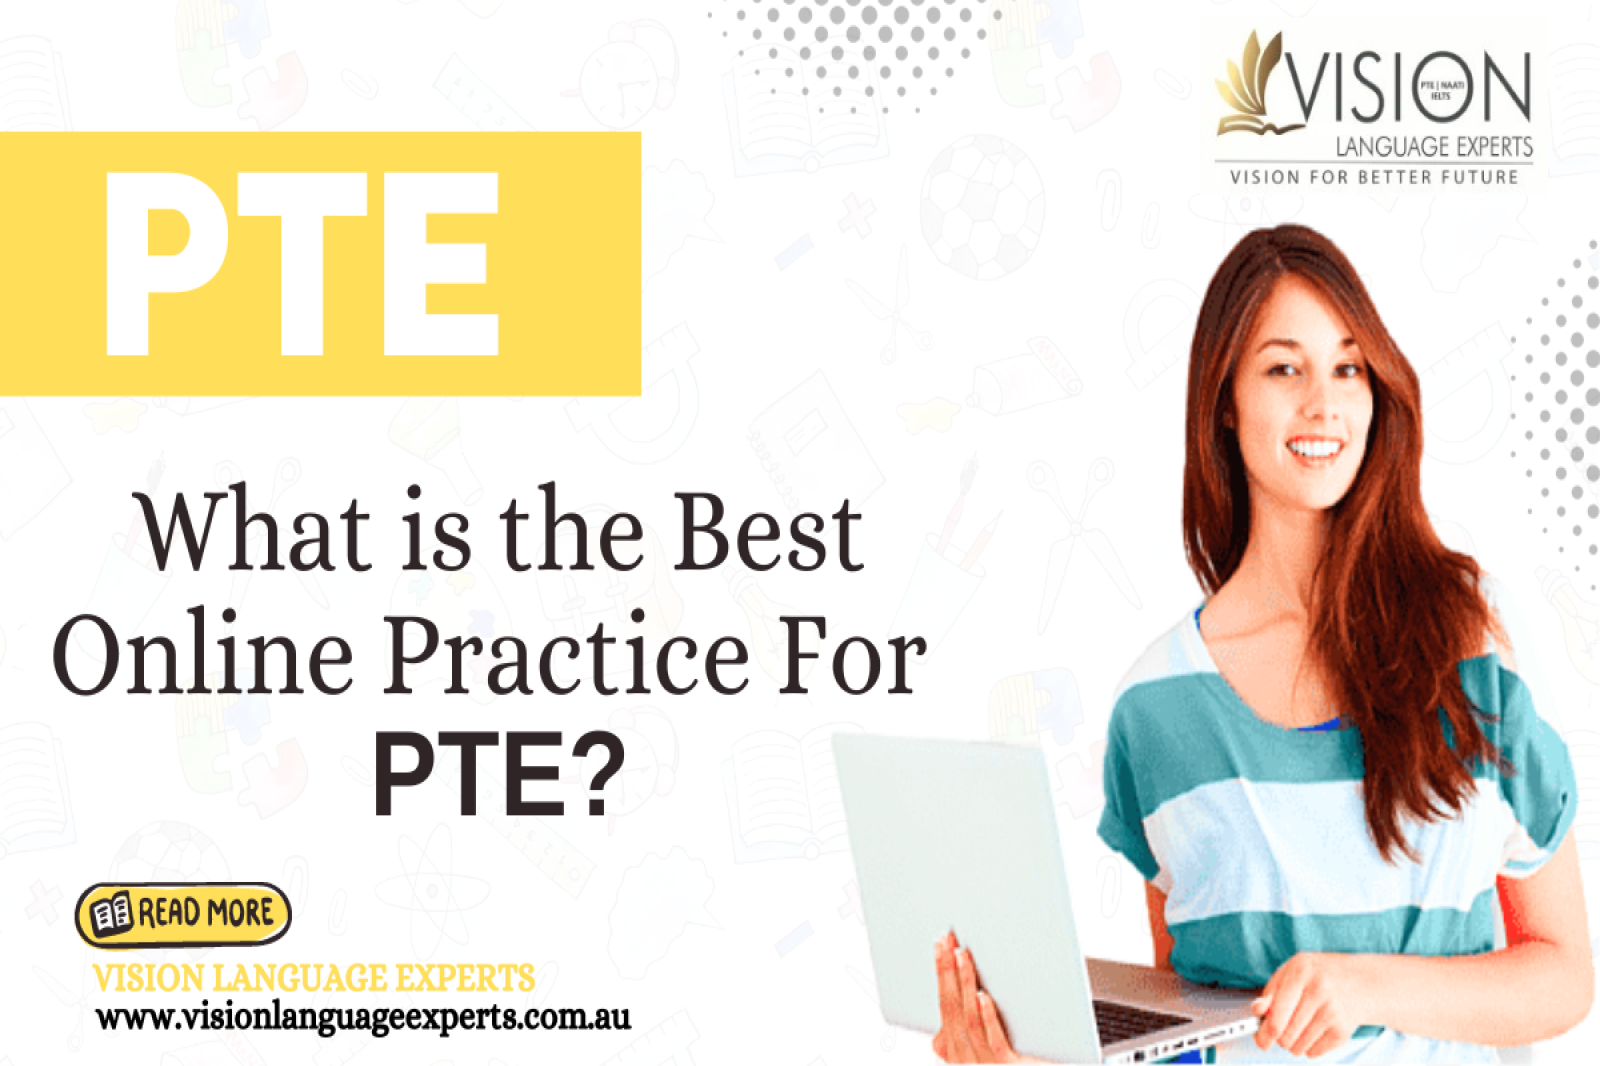 What is the best online practice for PTE?